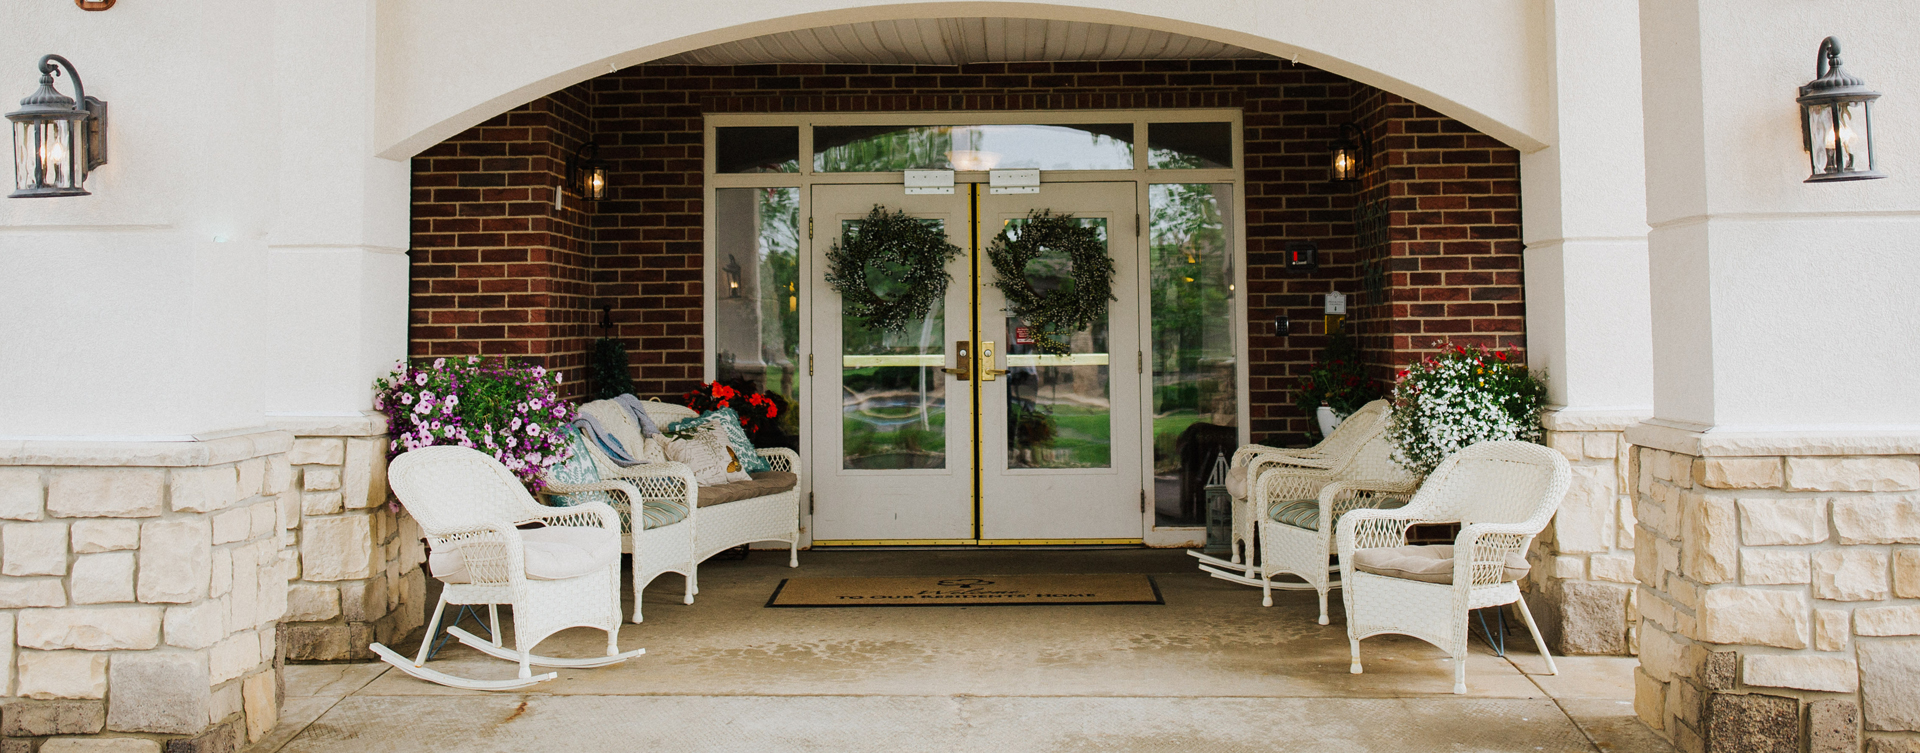 Relax in your favorite chair on the porch at Bickford of Bourbonnais